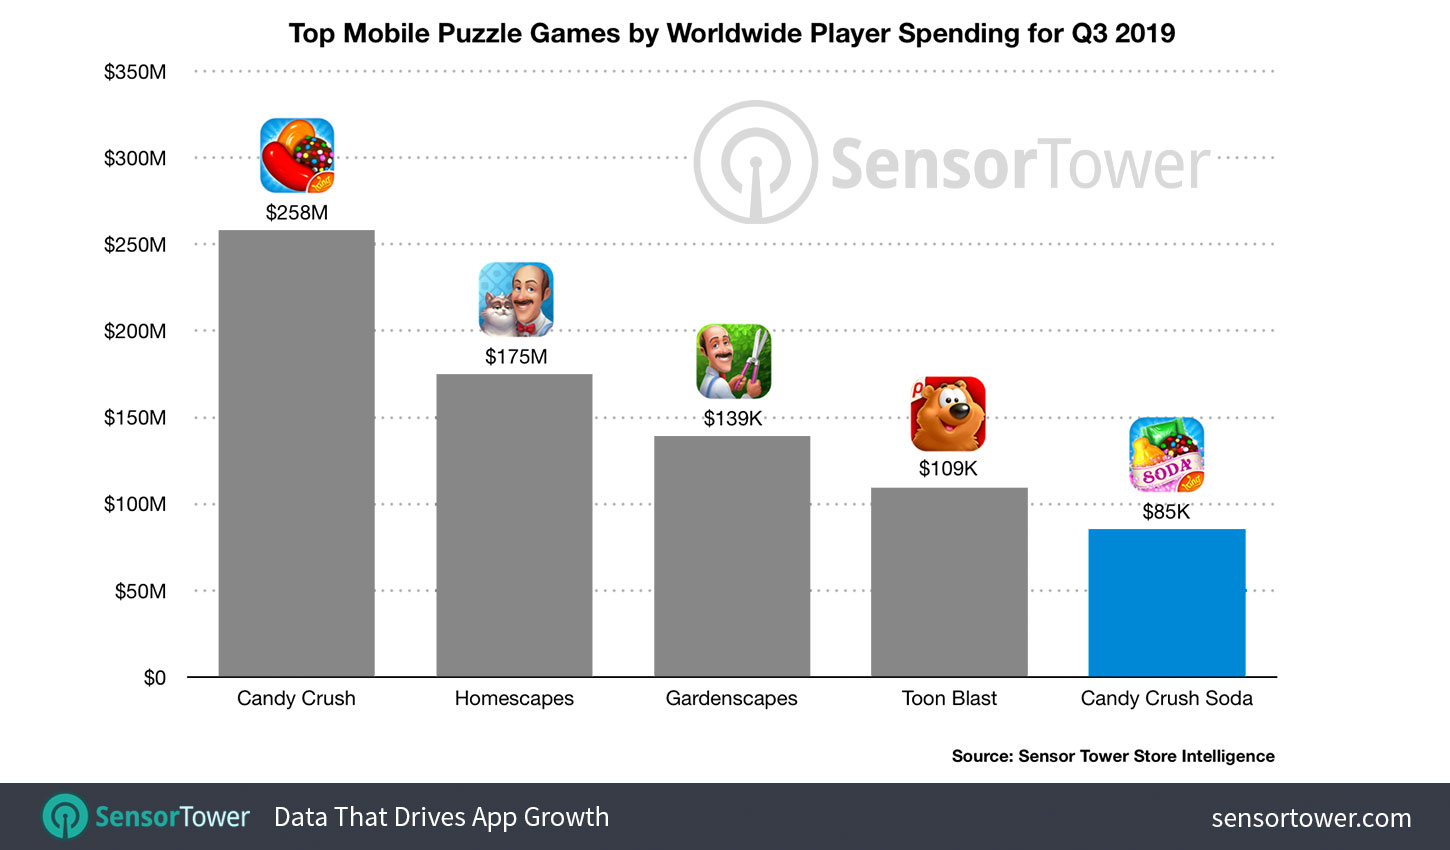 How much money has Candy Crush made in total?